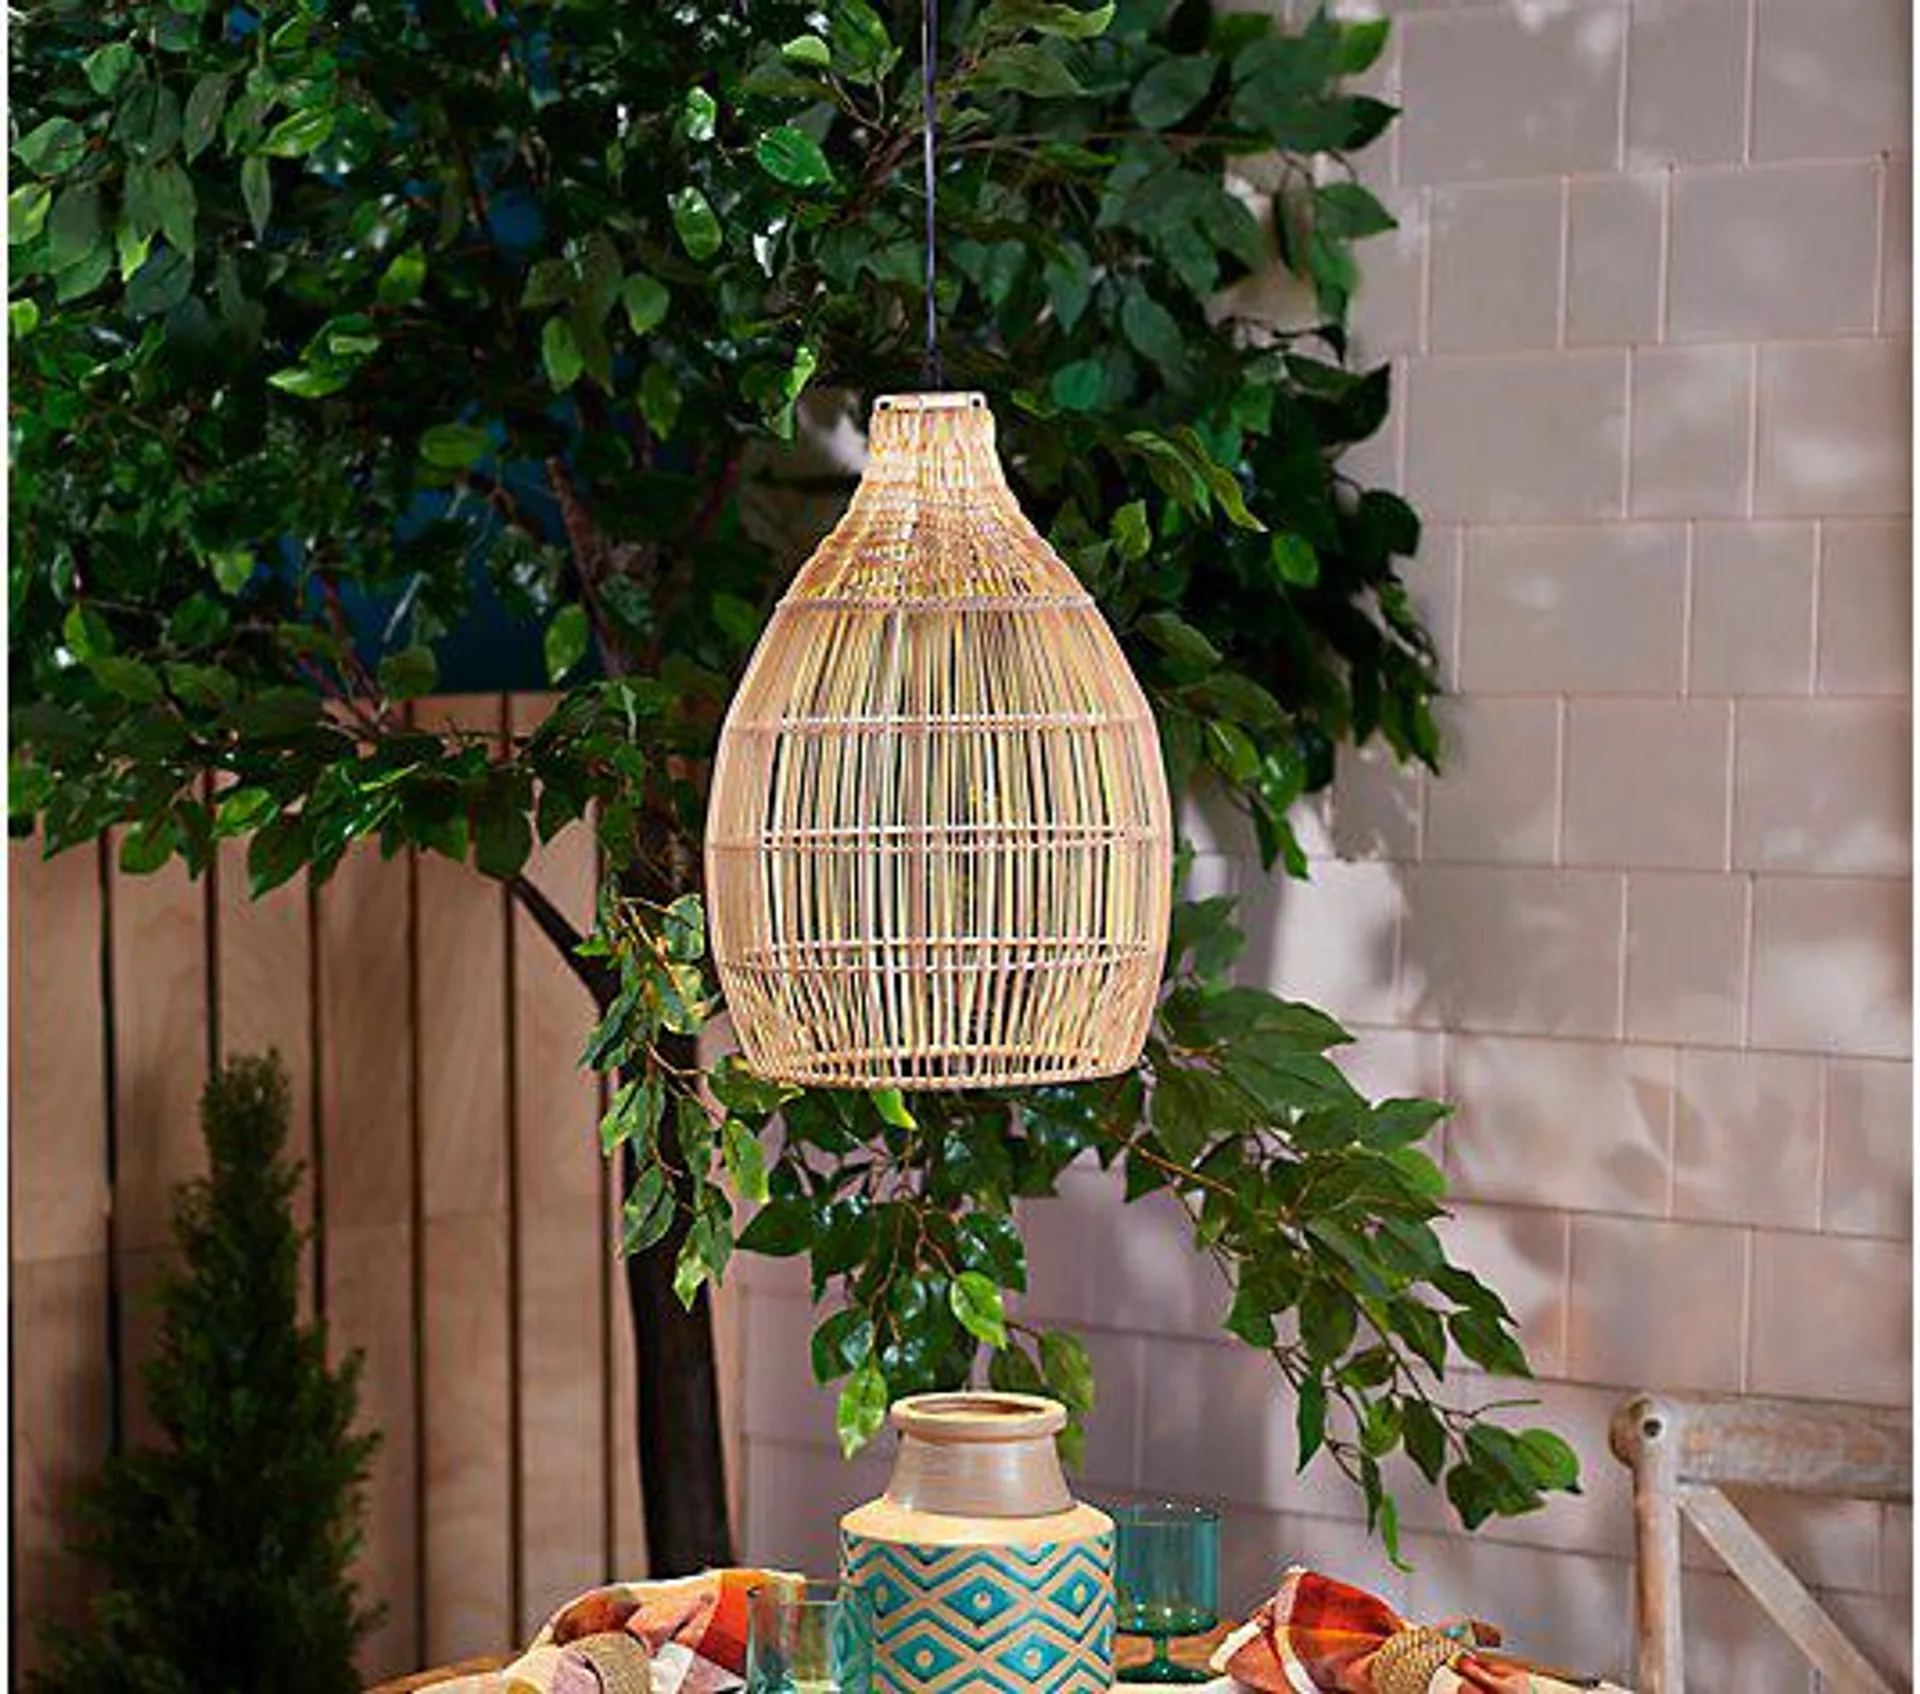 My Home 16.5" Tall Faux Rattan Solar Hanging Pendant Light